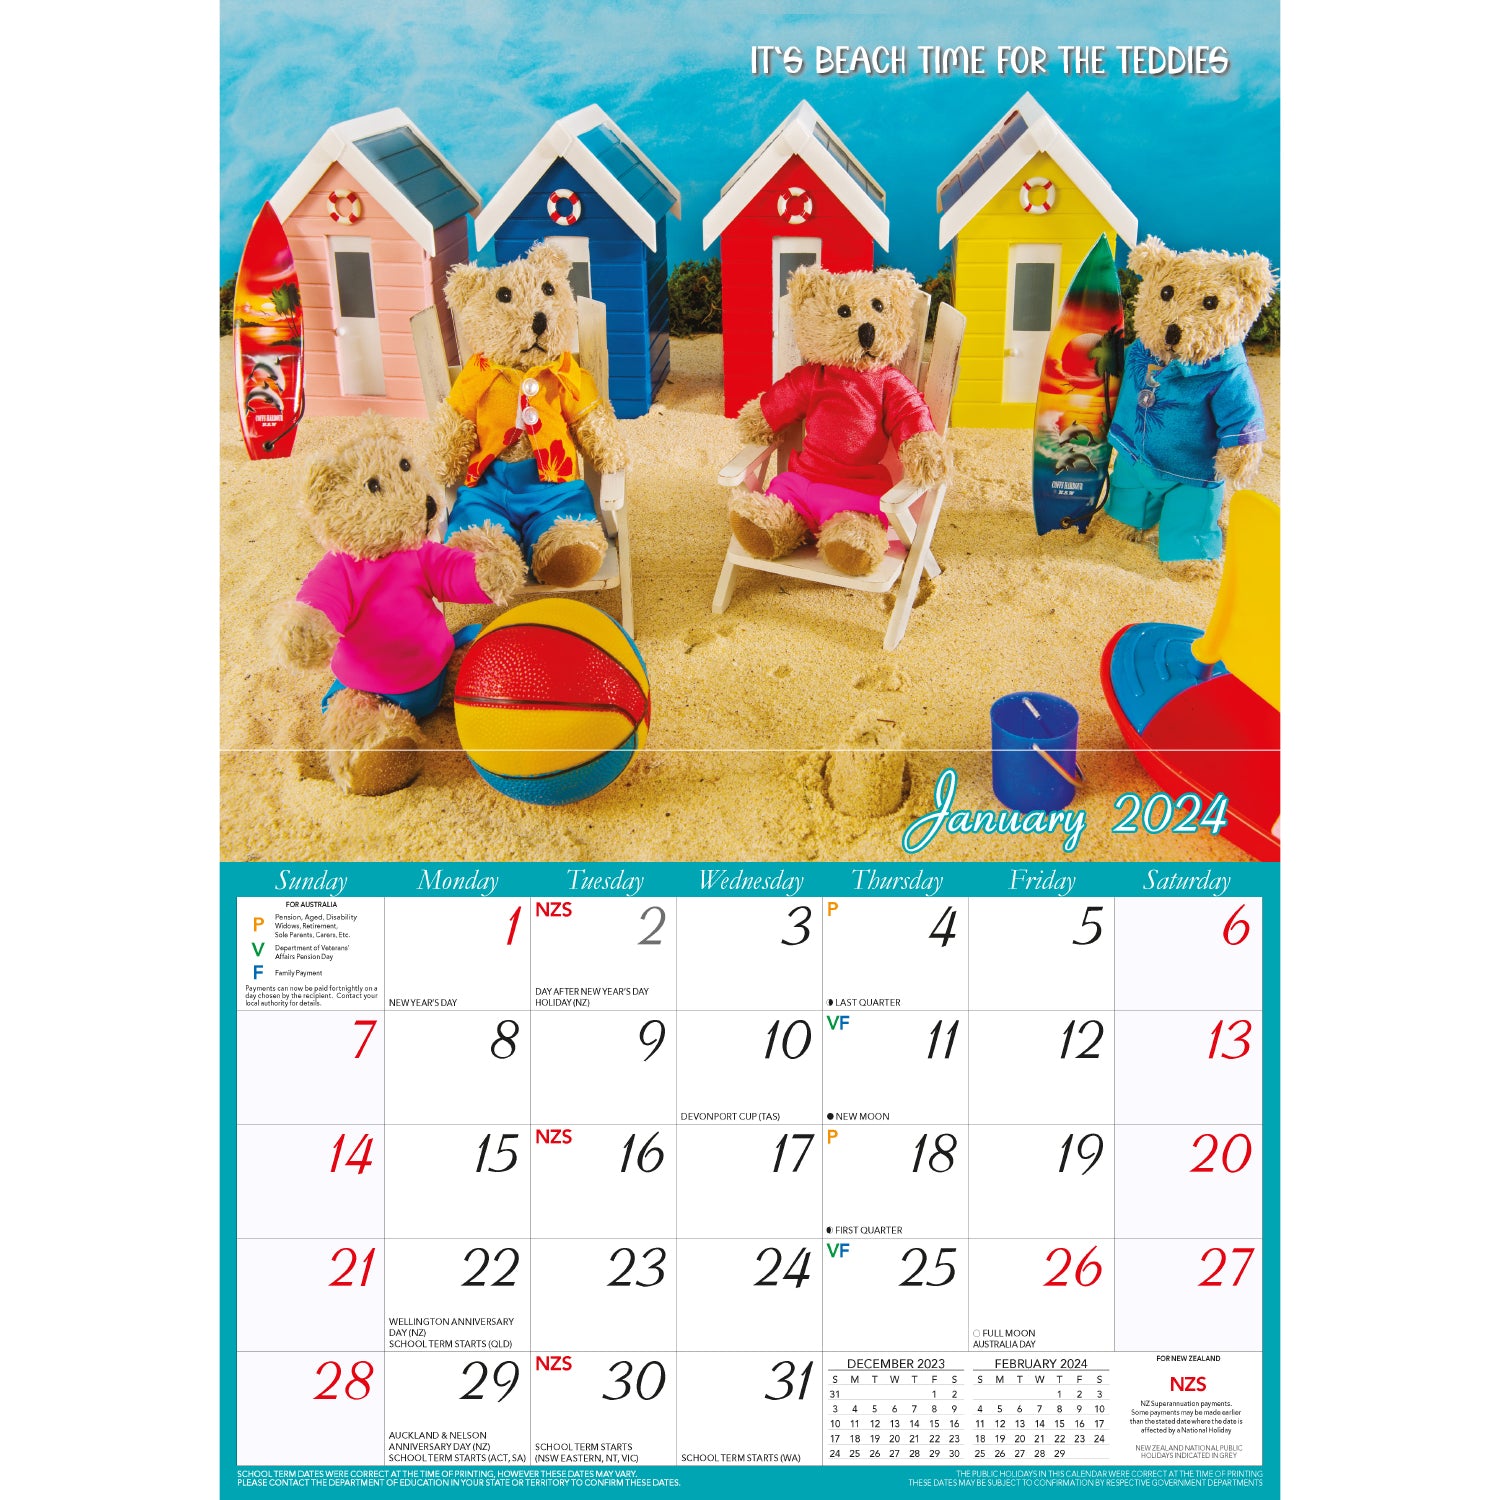 Life of Teddy - 2024 Rectangle Wall Calendar 13 Months Planner Adventures Gift